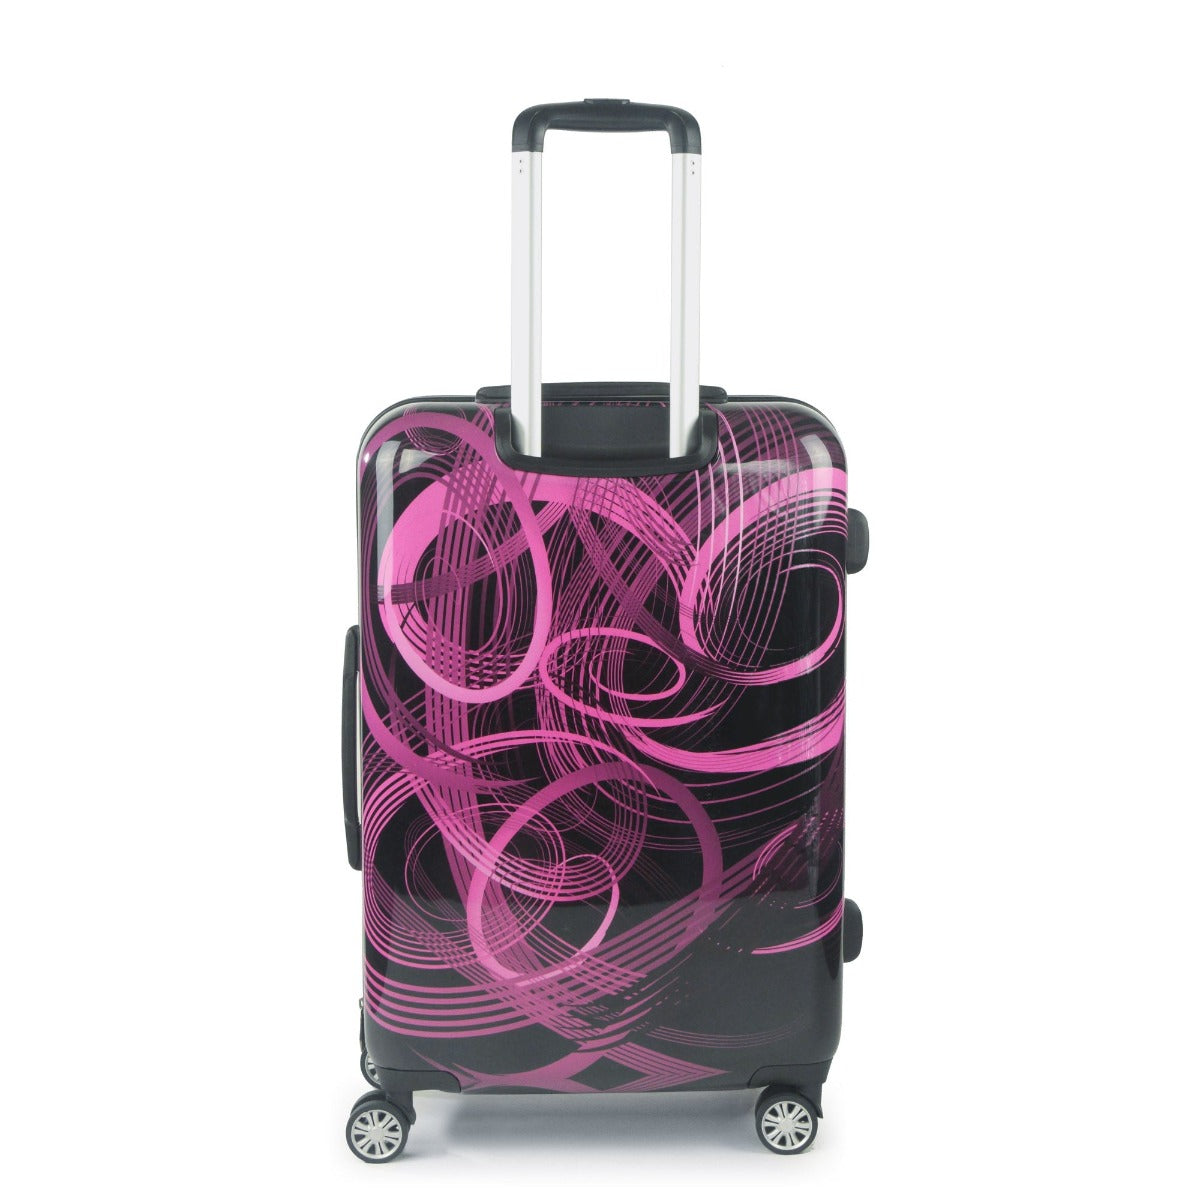 FUL Rolling spinner suitcase Luggage Pink Neon Laser 24" Pink and Black